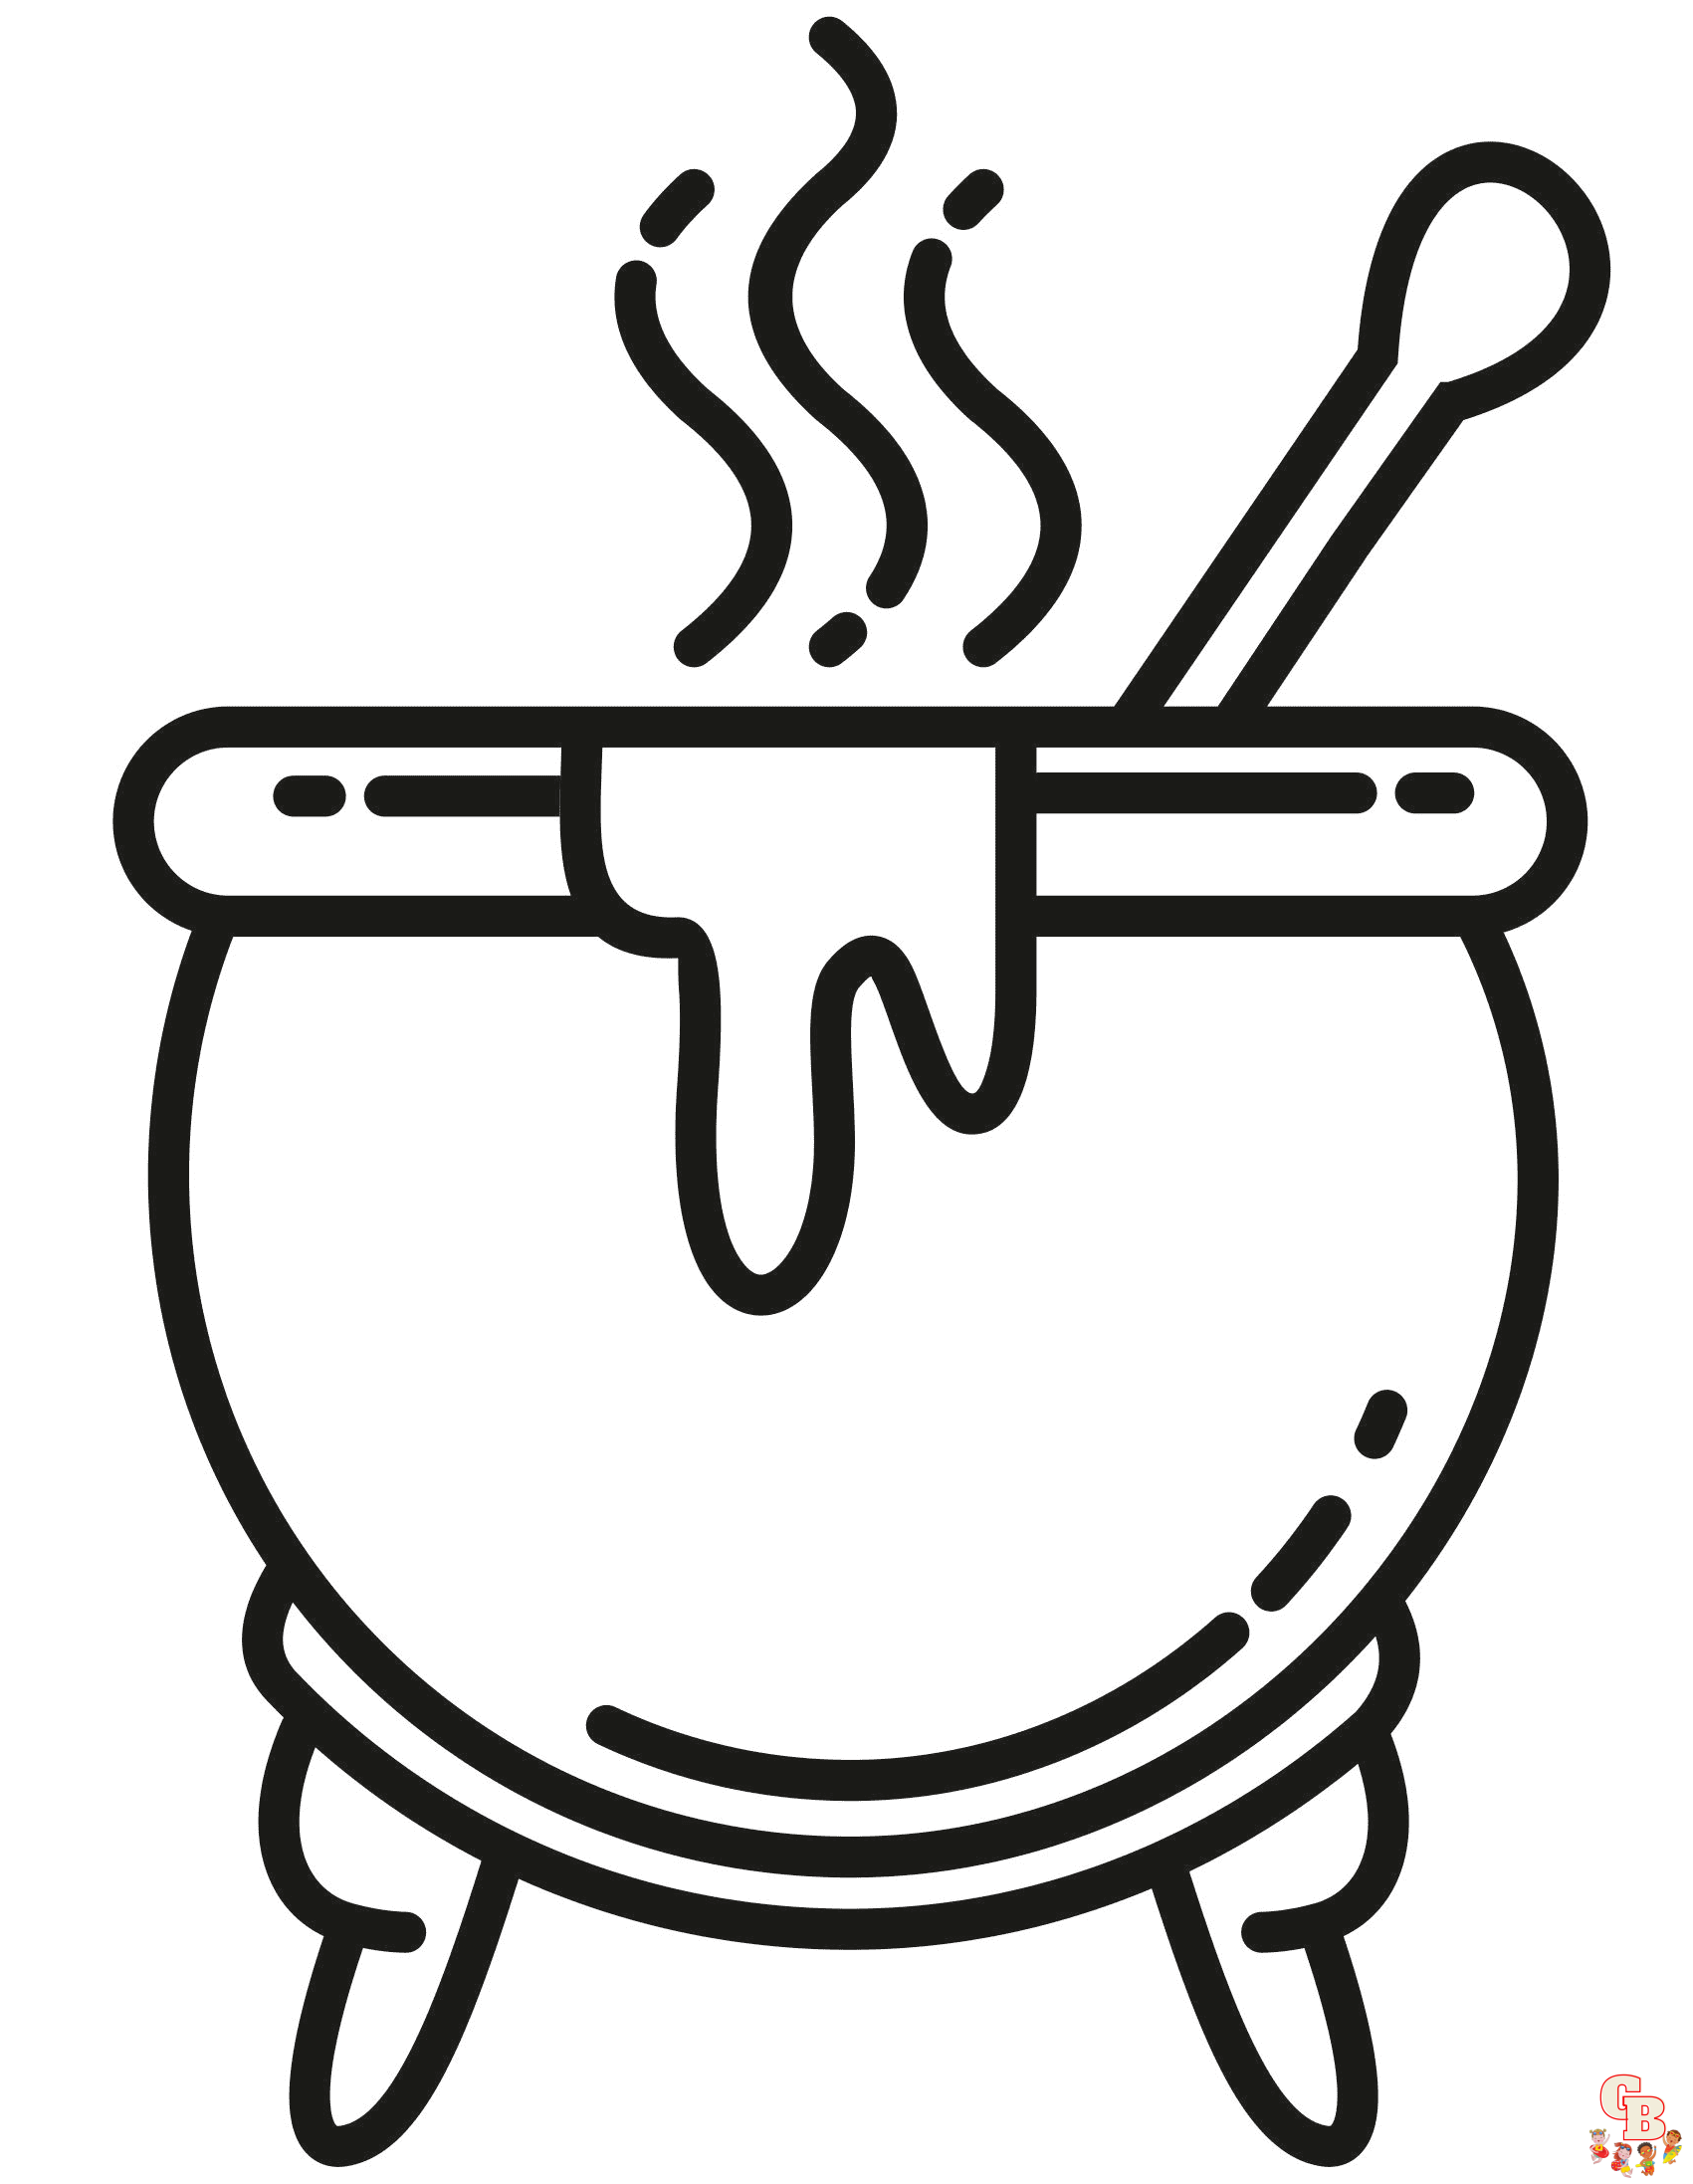 Cauldron coloring pages to print